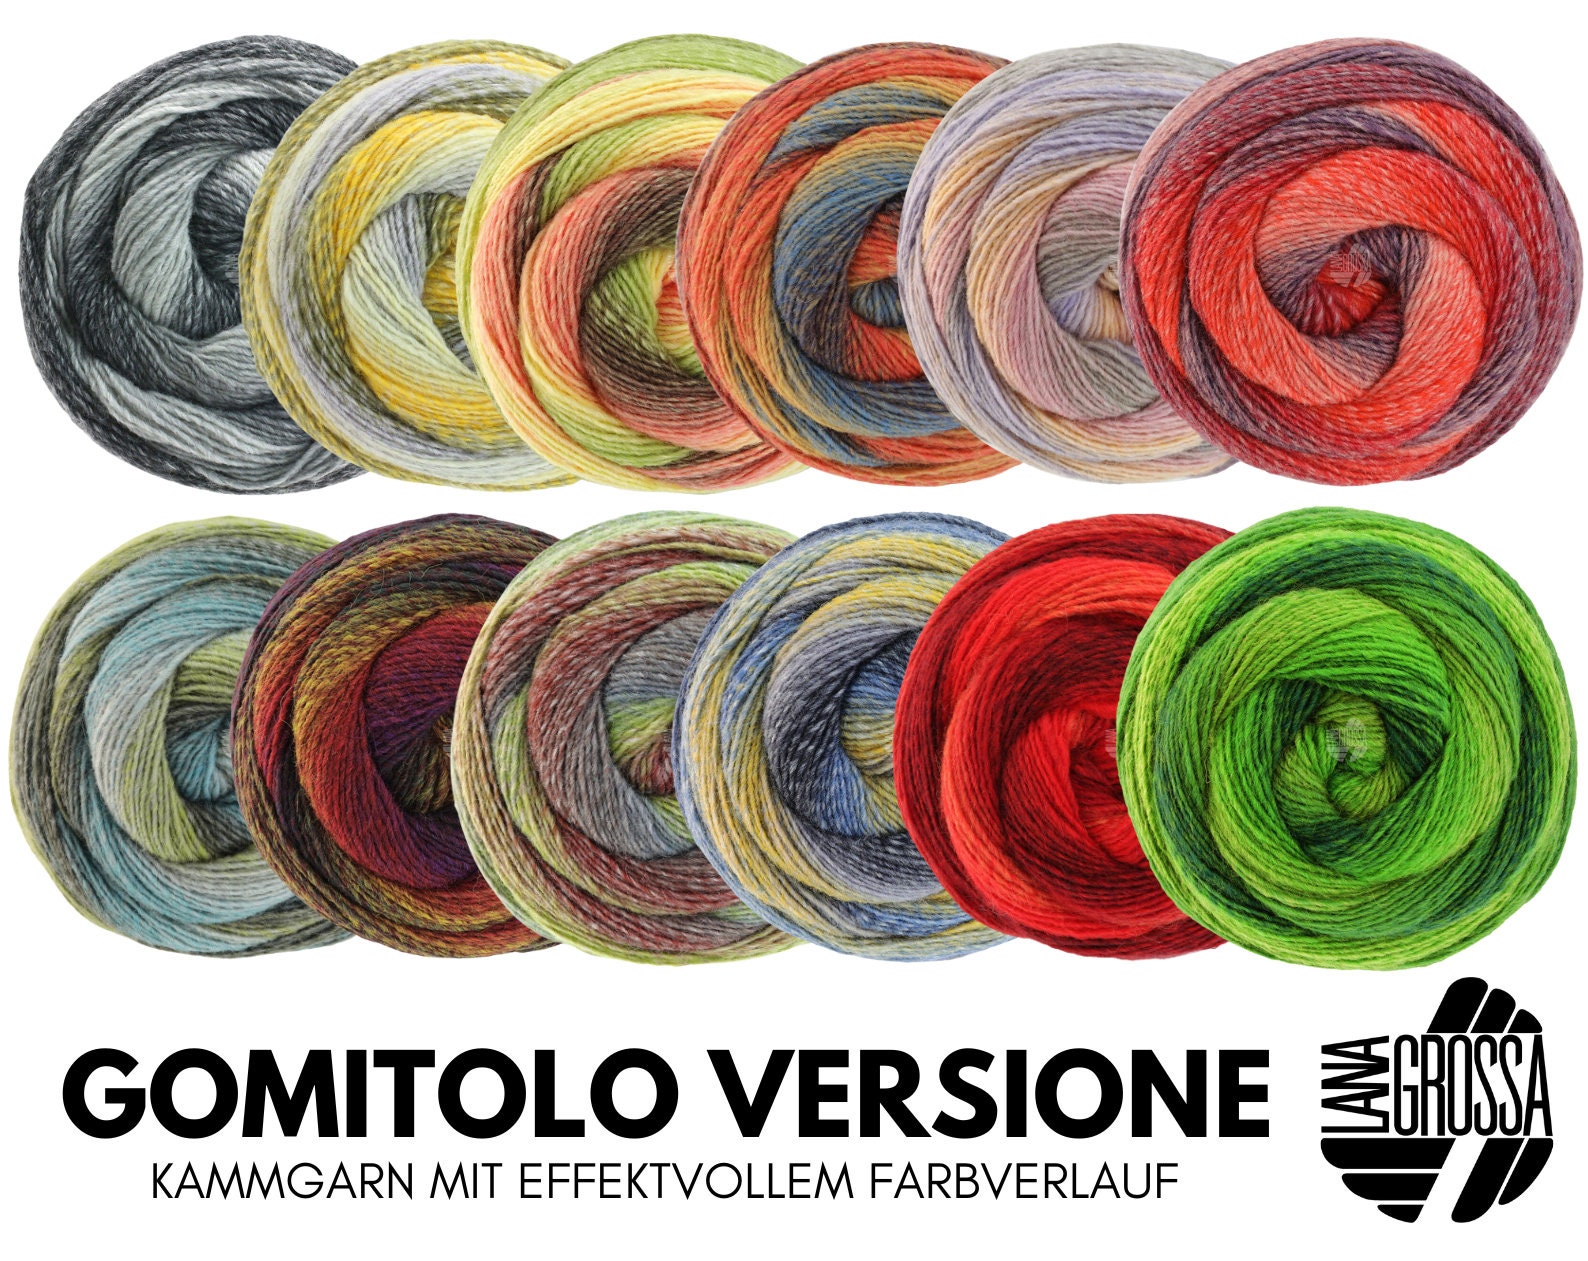 Lana Grossa GOMITOLO VERSION 200 G Lightly Twisted Worsted Yarn With  Effective Color Gradient and Structure 700 M -  Hong Kong